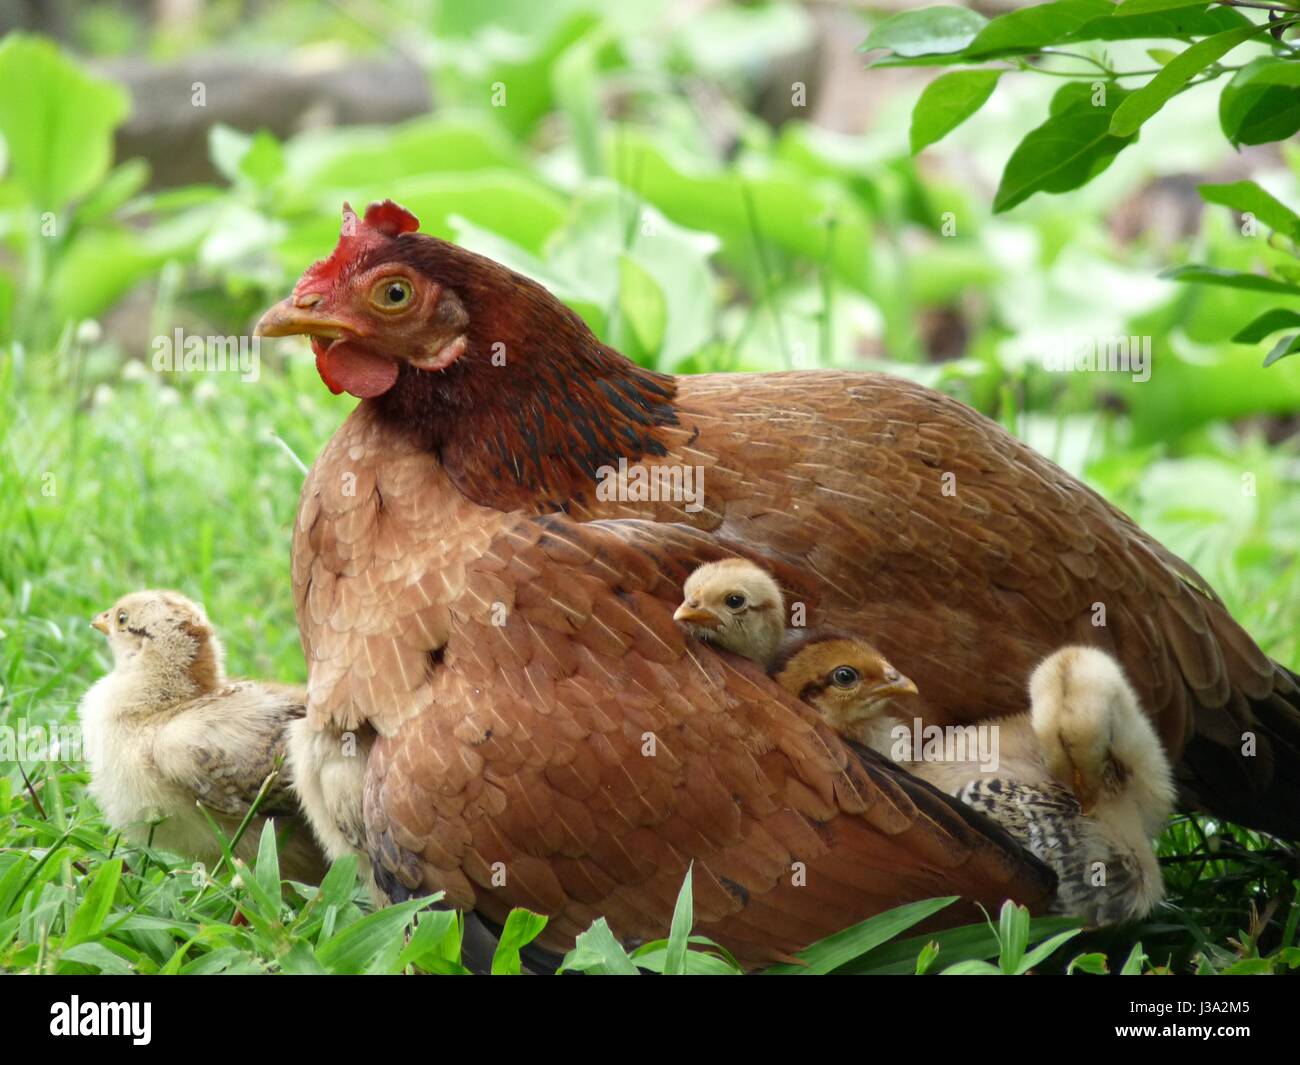 Close up of mother hen with three cute small chicks under her wing and one beside her surrounded by greenery Stock Photo